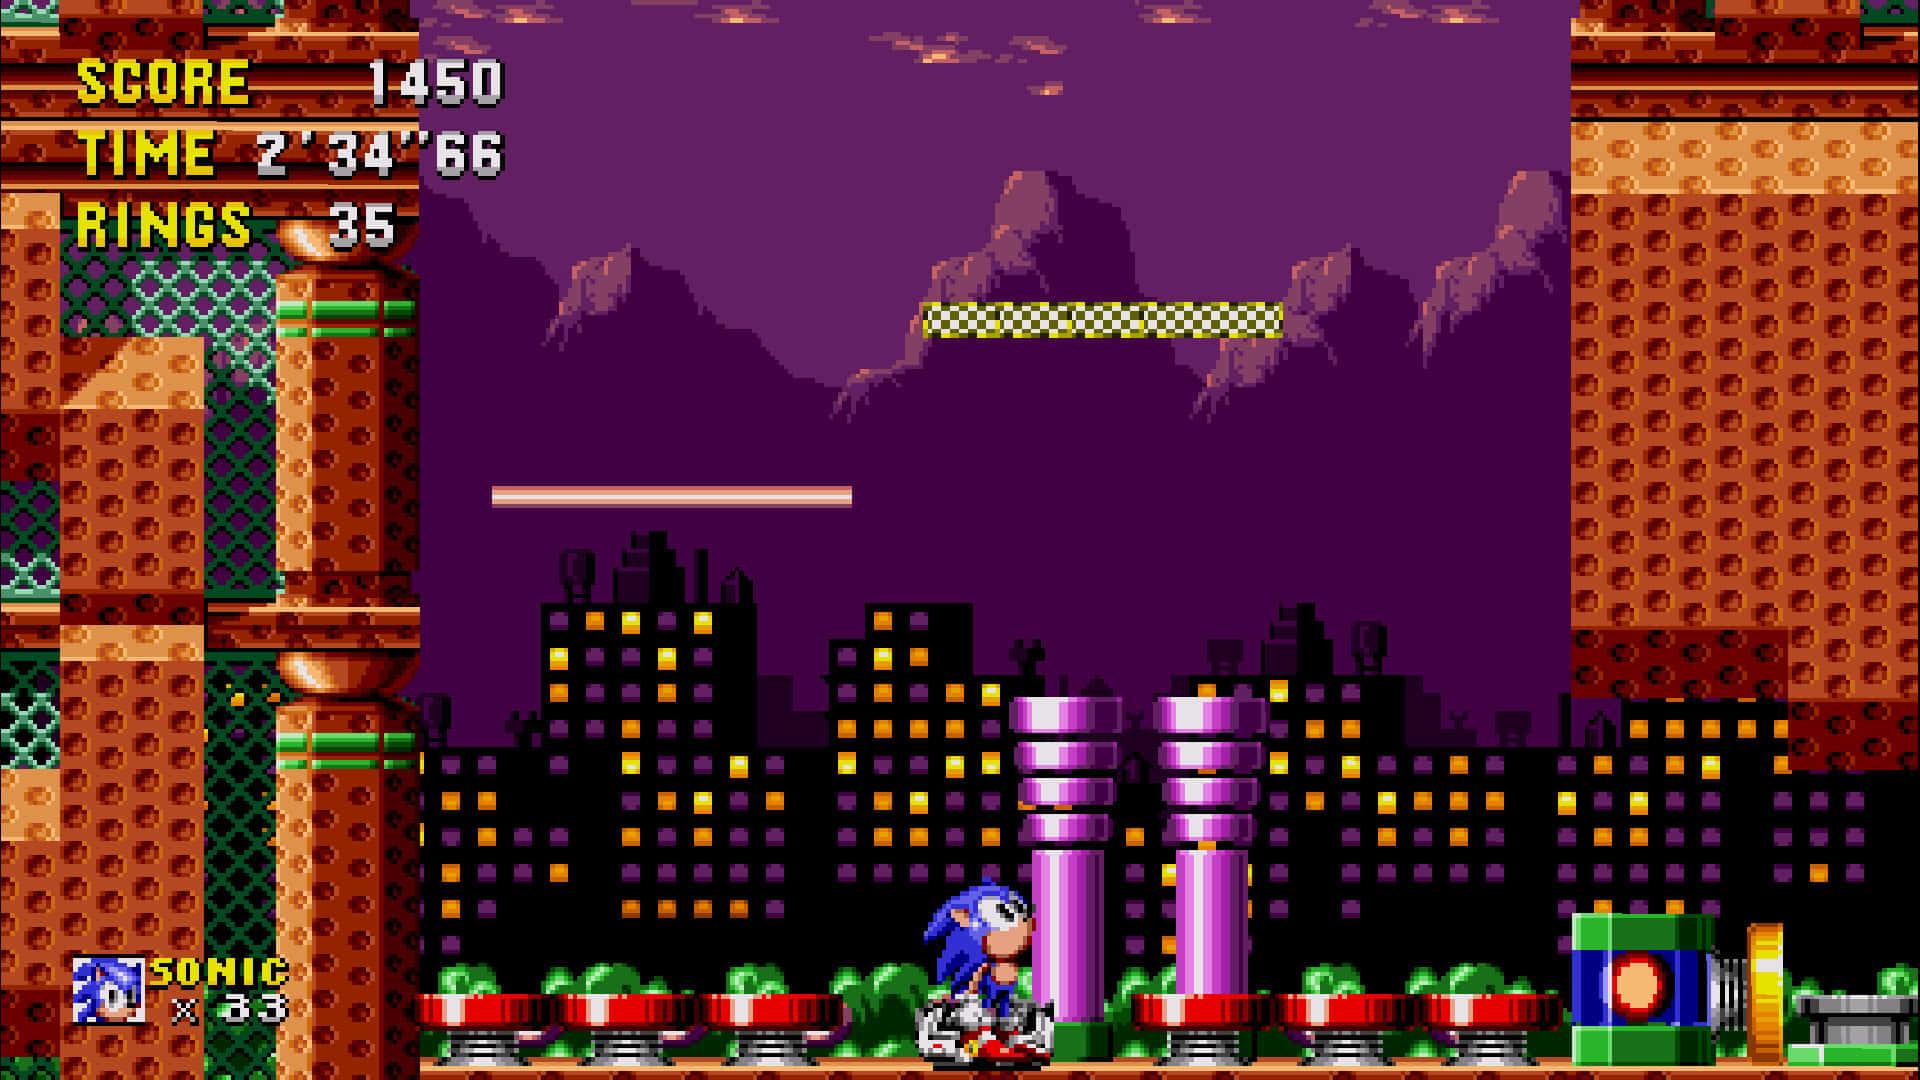 Sonic the Hedgehog exploring the vibrant Spring Yard Zone Wallpaper